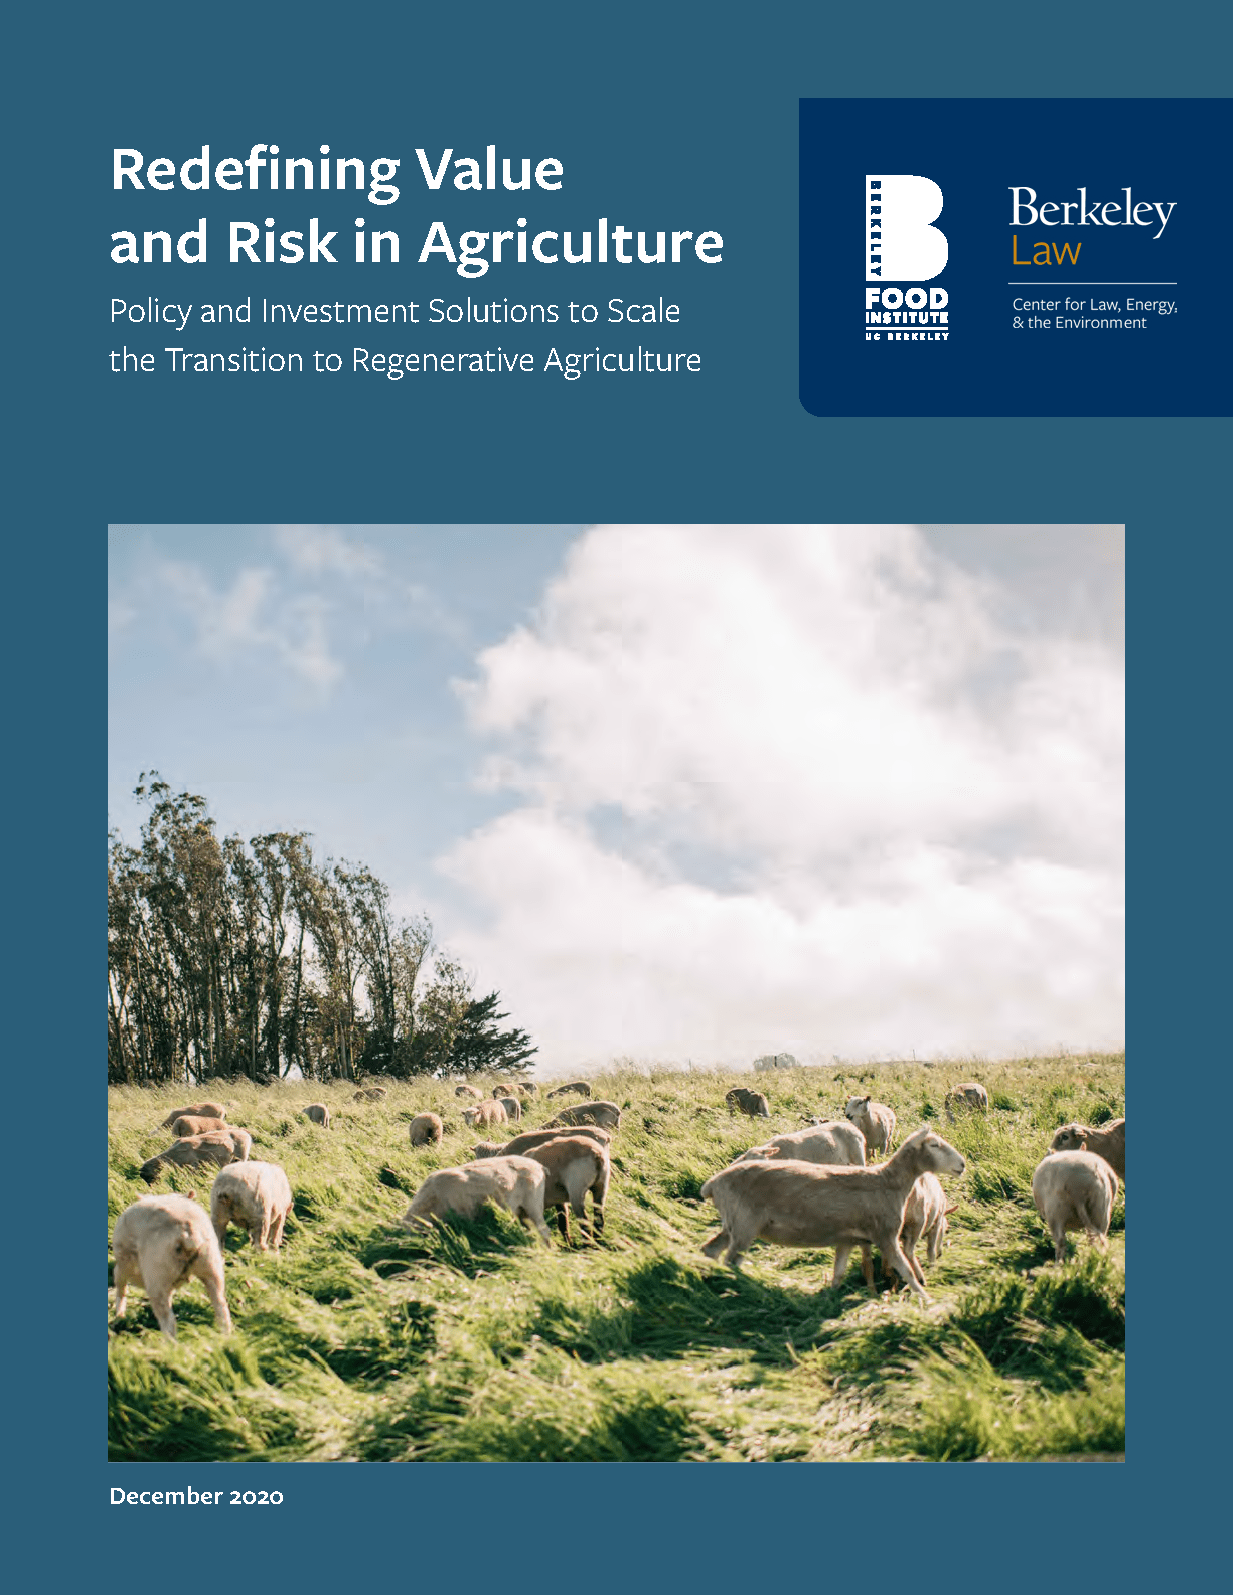 Redefining Value and Risk in Agriculture report cover